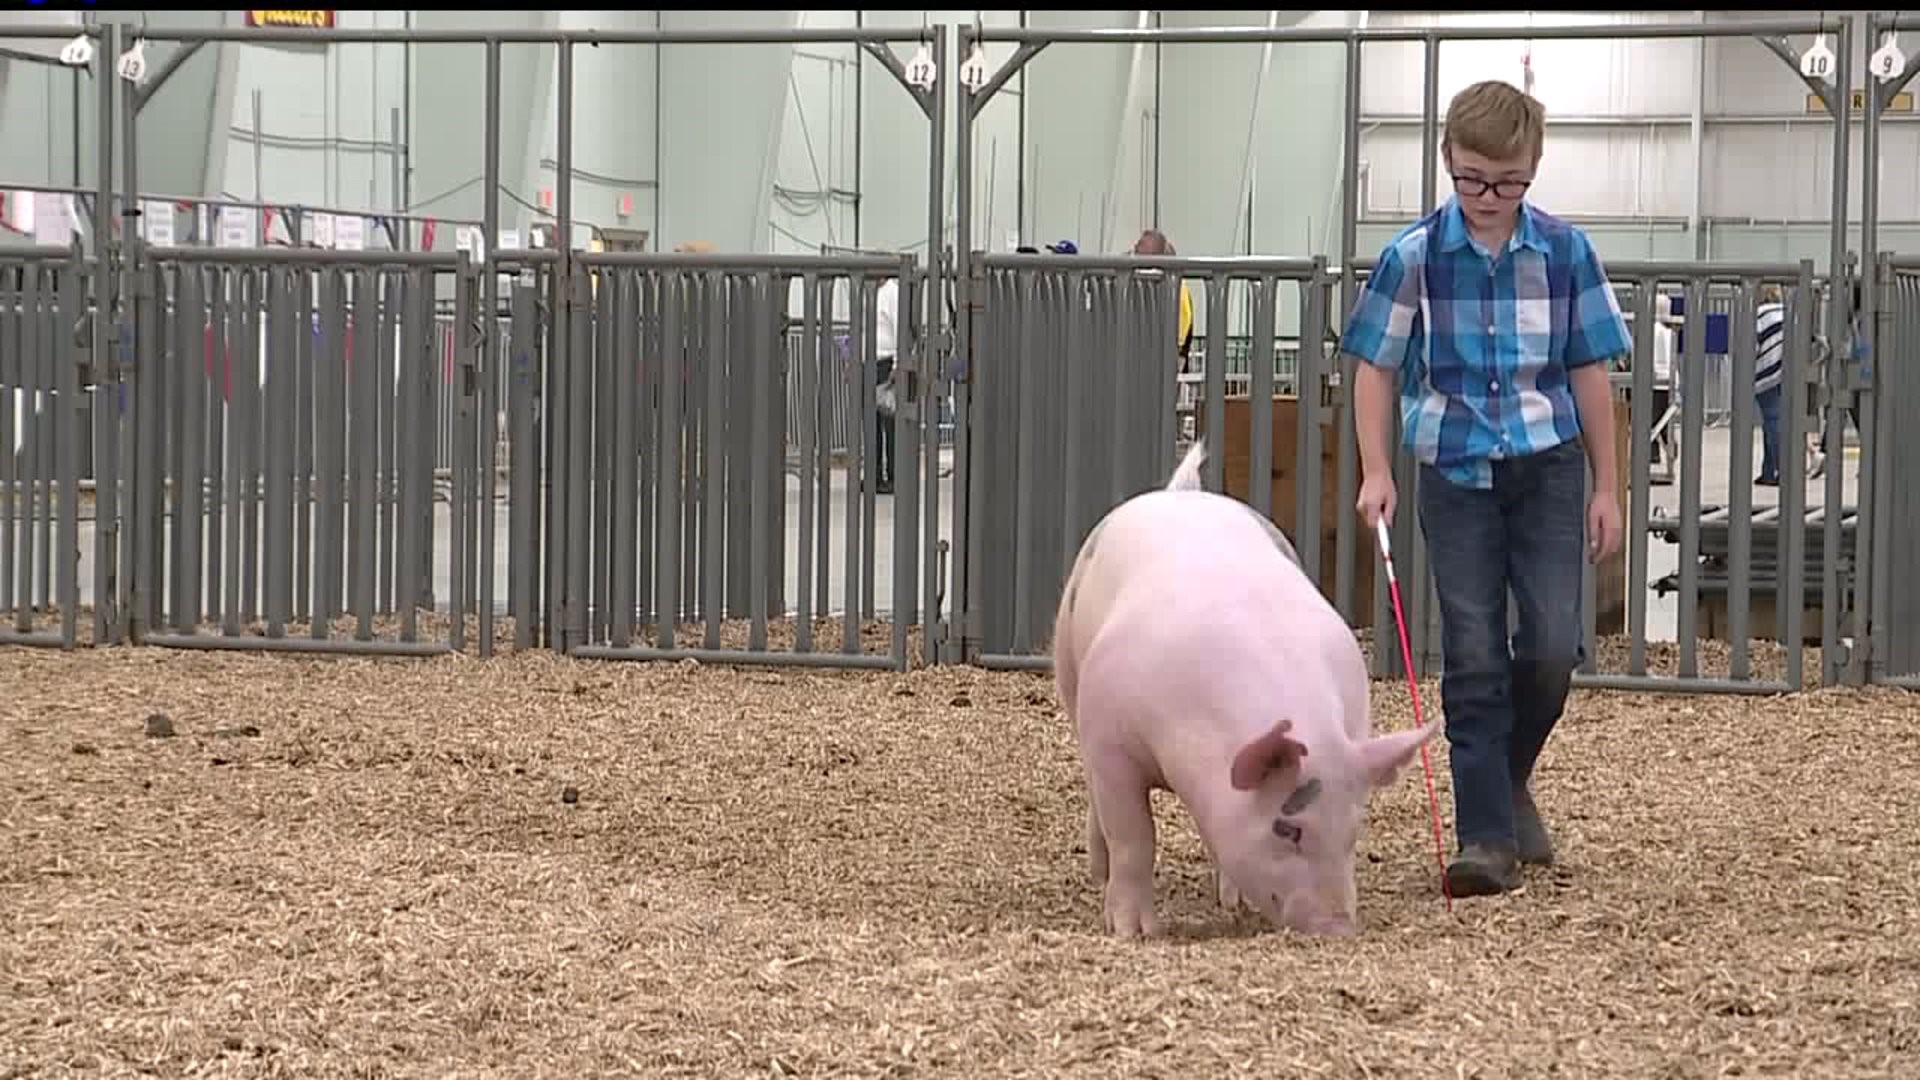 York boy, 11, with heart condition to donate livestock auction winnings to heart group